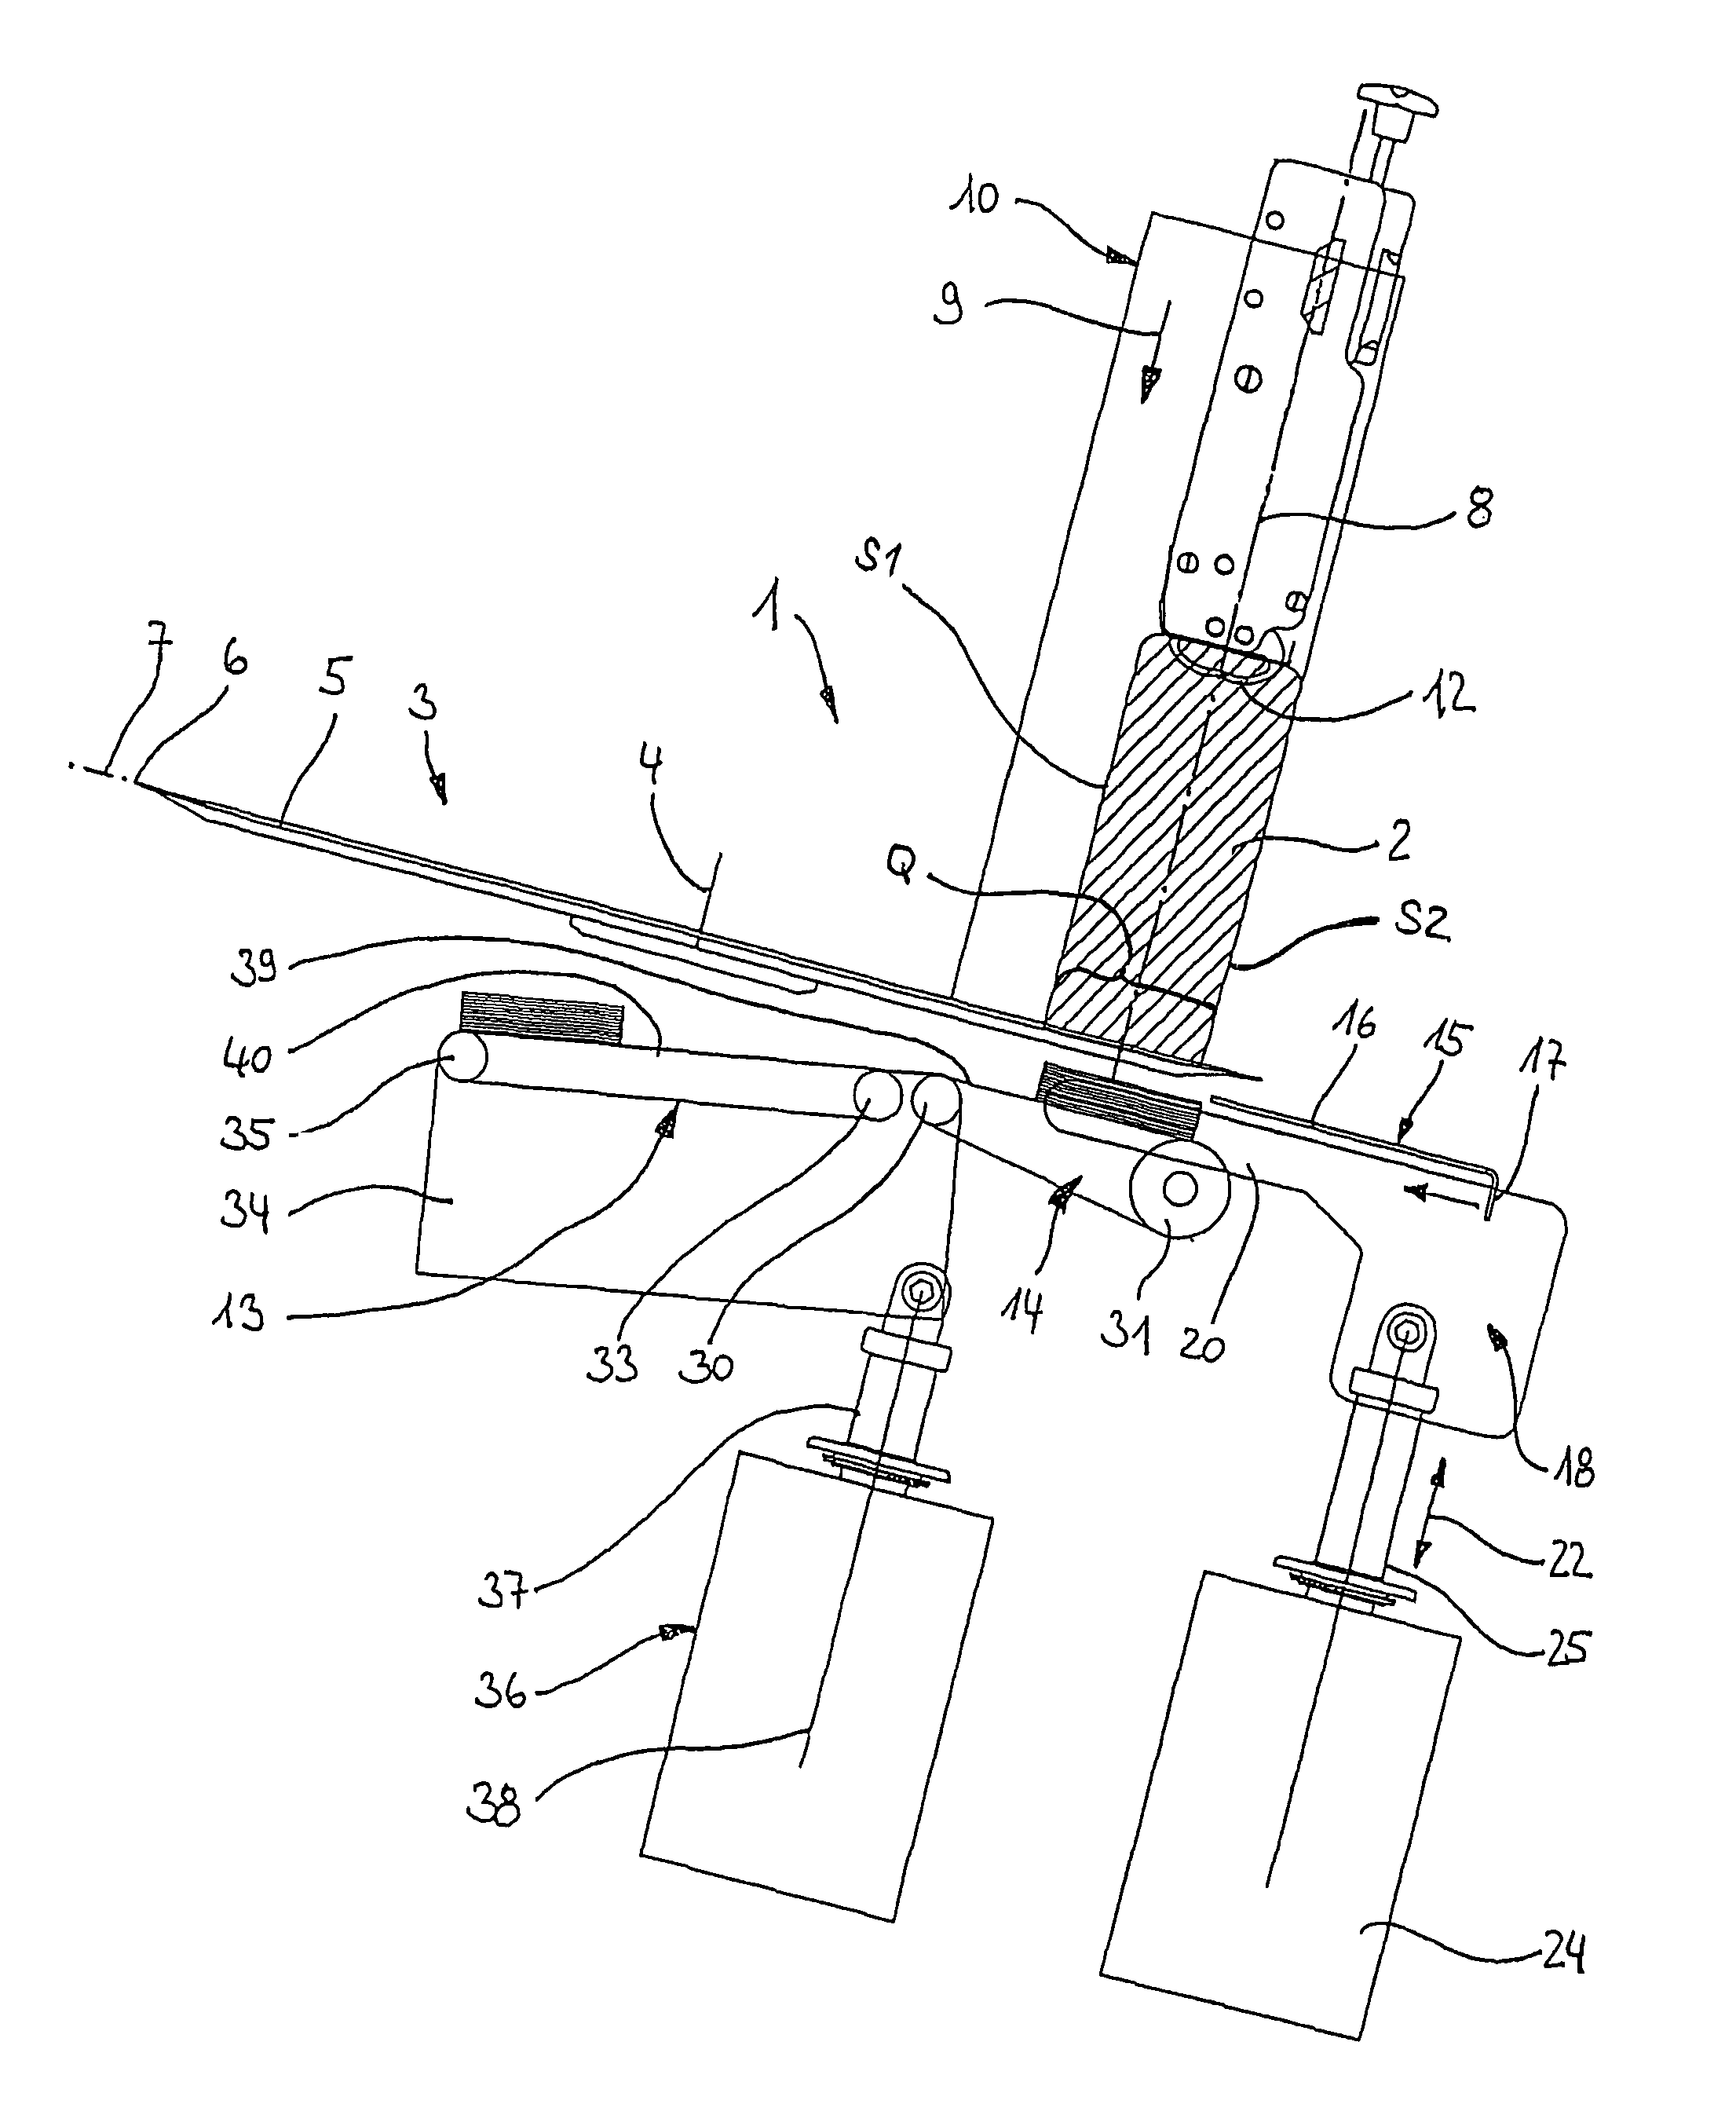 Method for cutting a food standard into slices